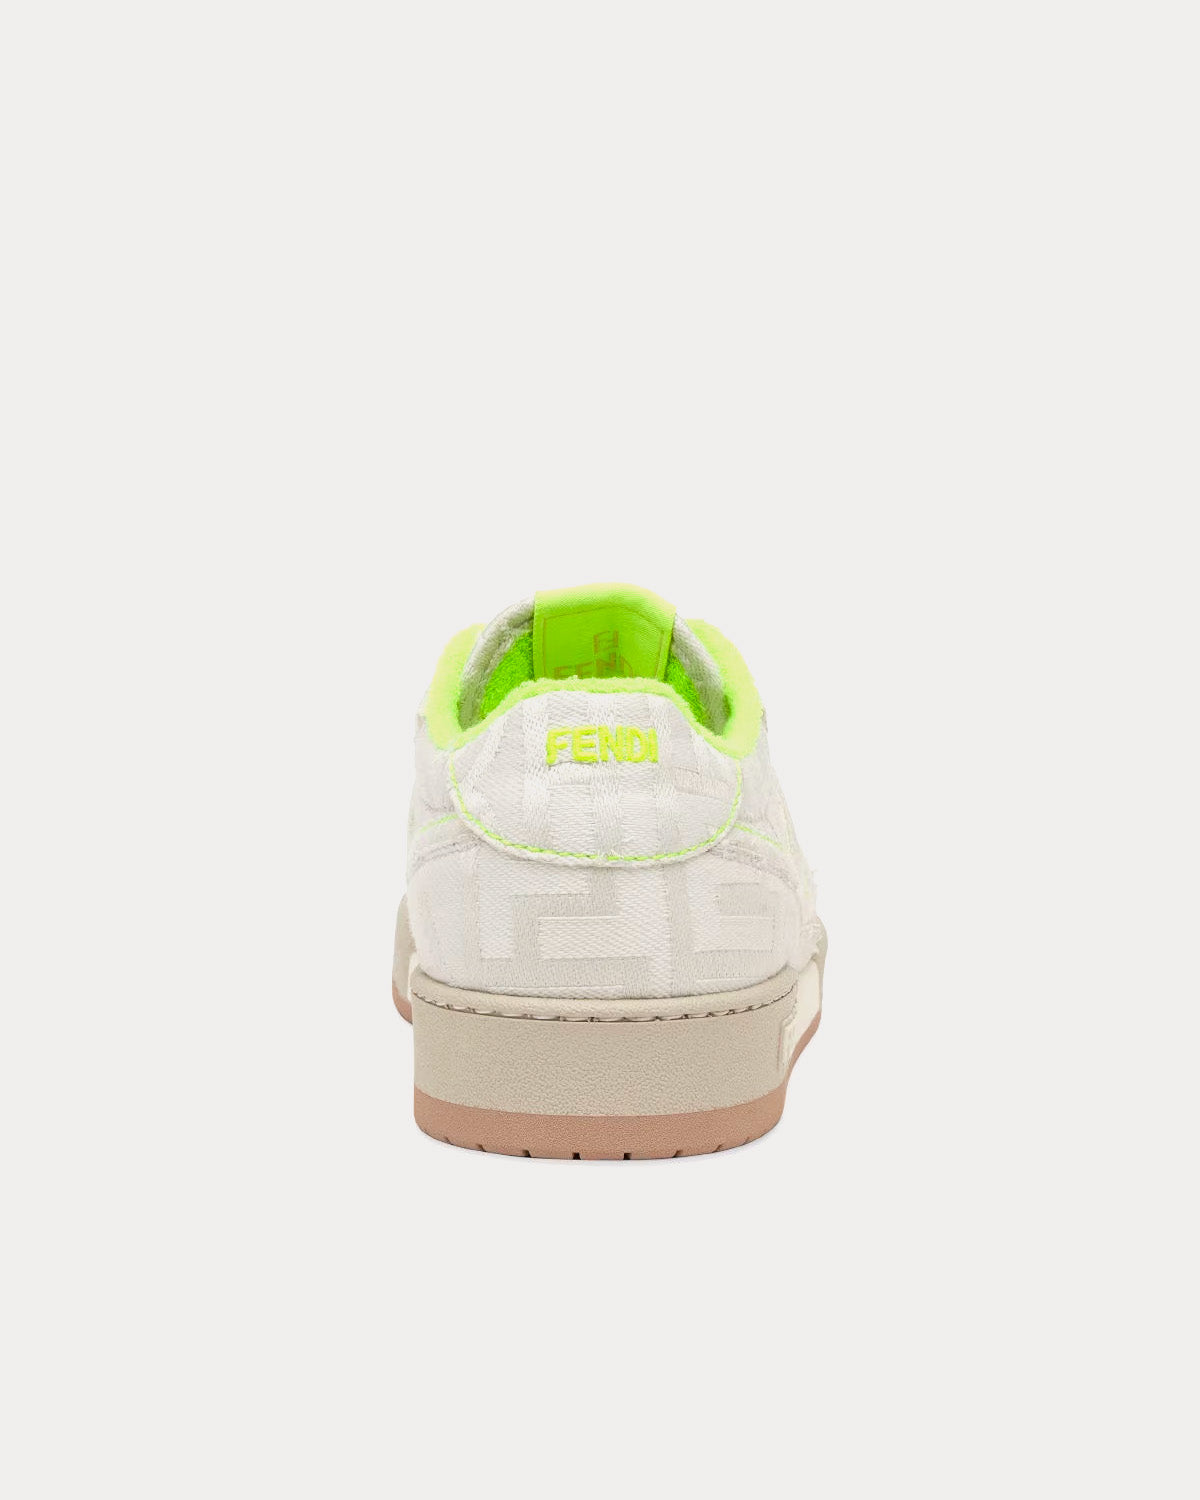 Fendi by Marc Jacobs - Match Canvas White Low Top Sneakers